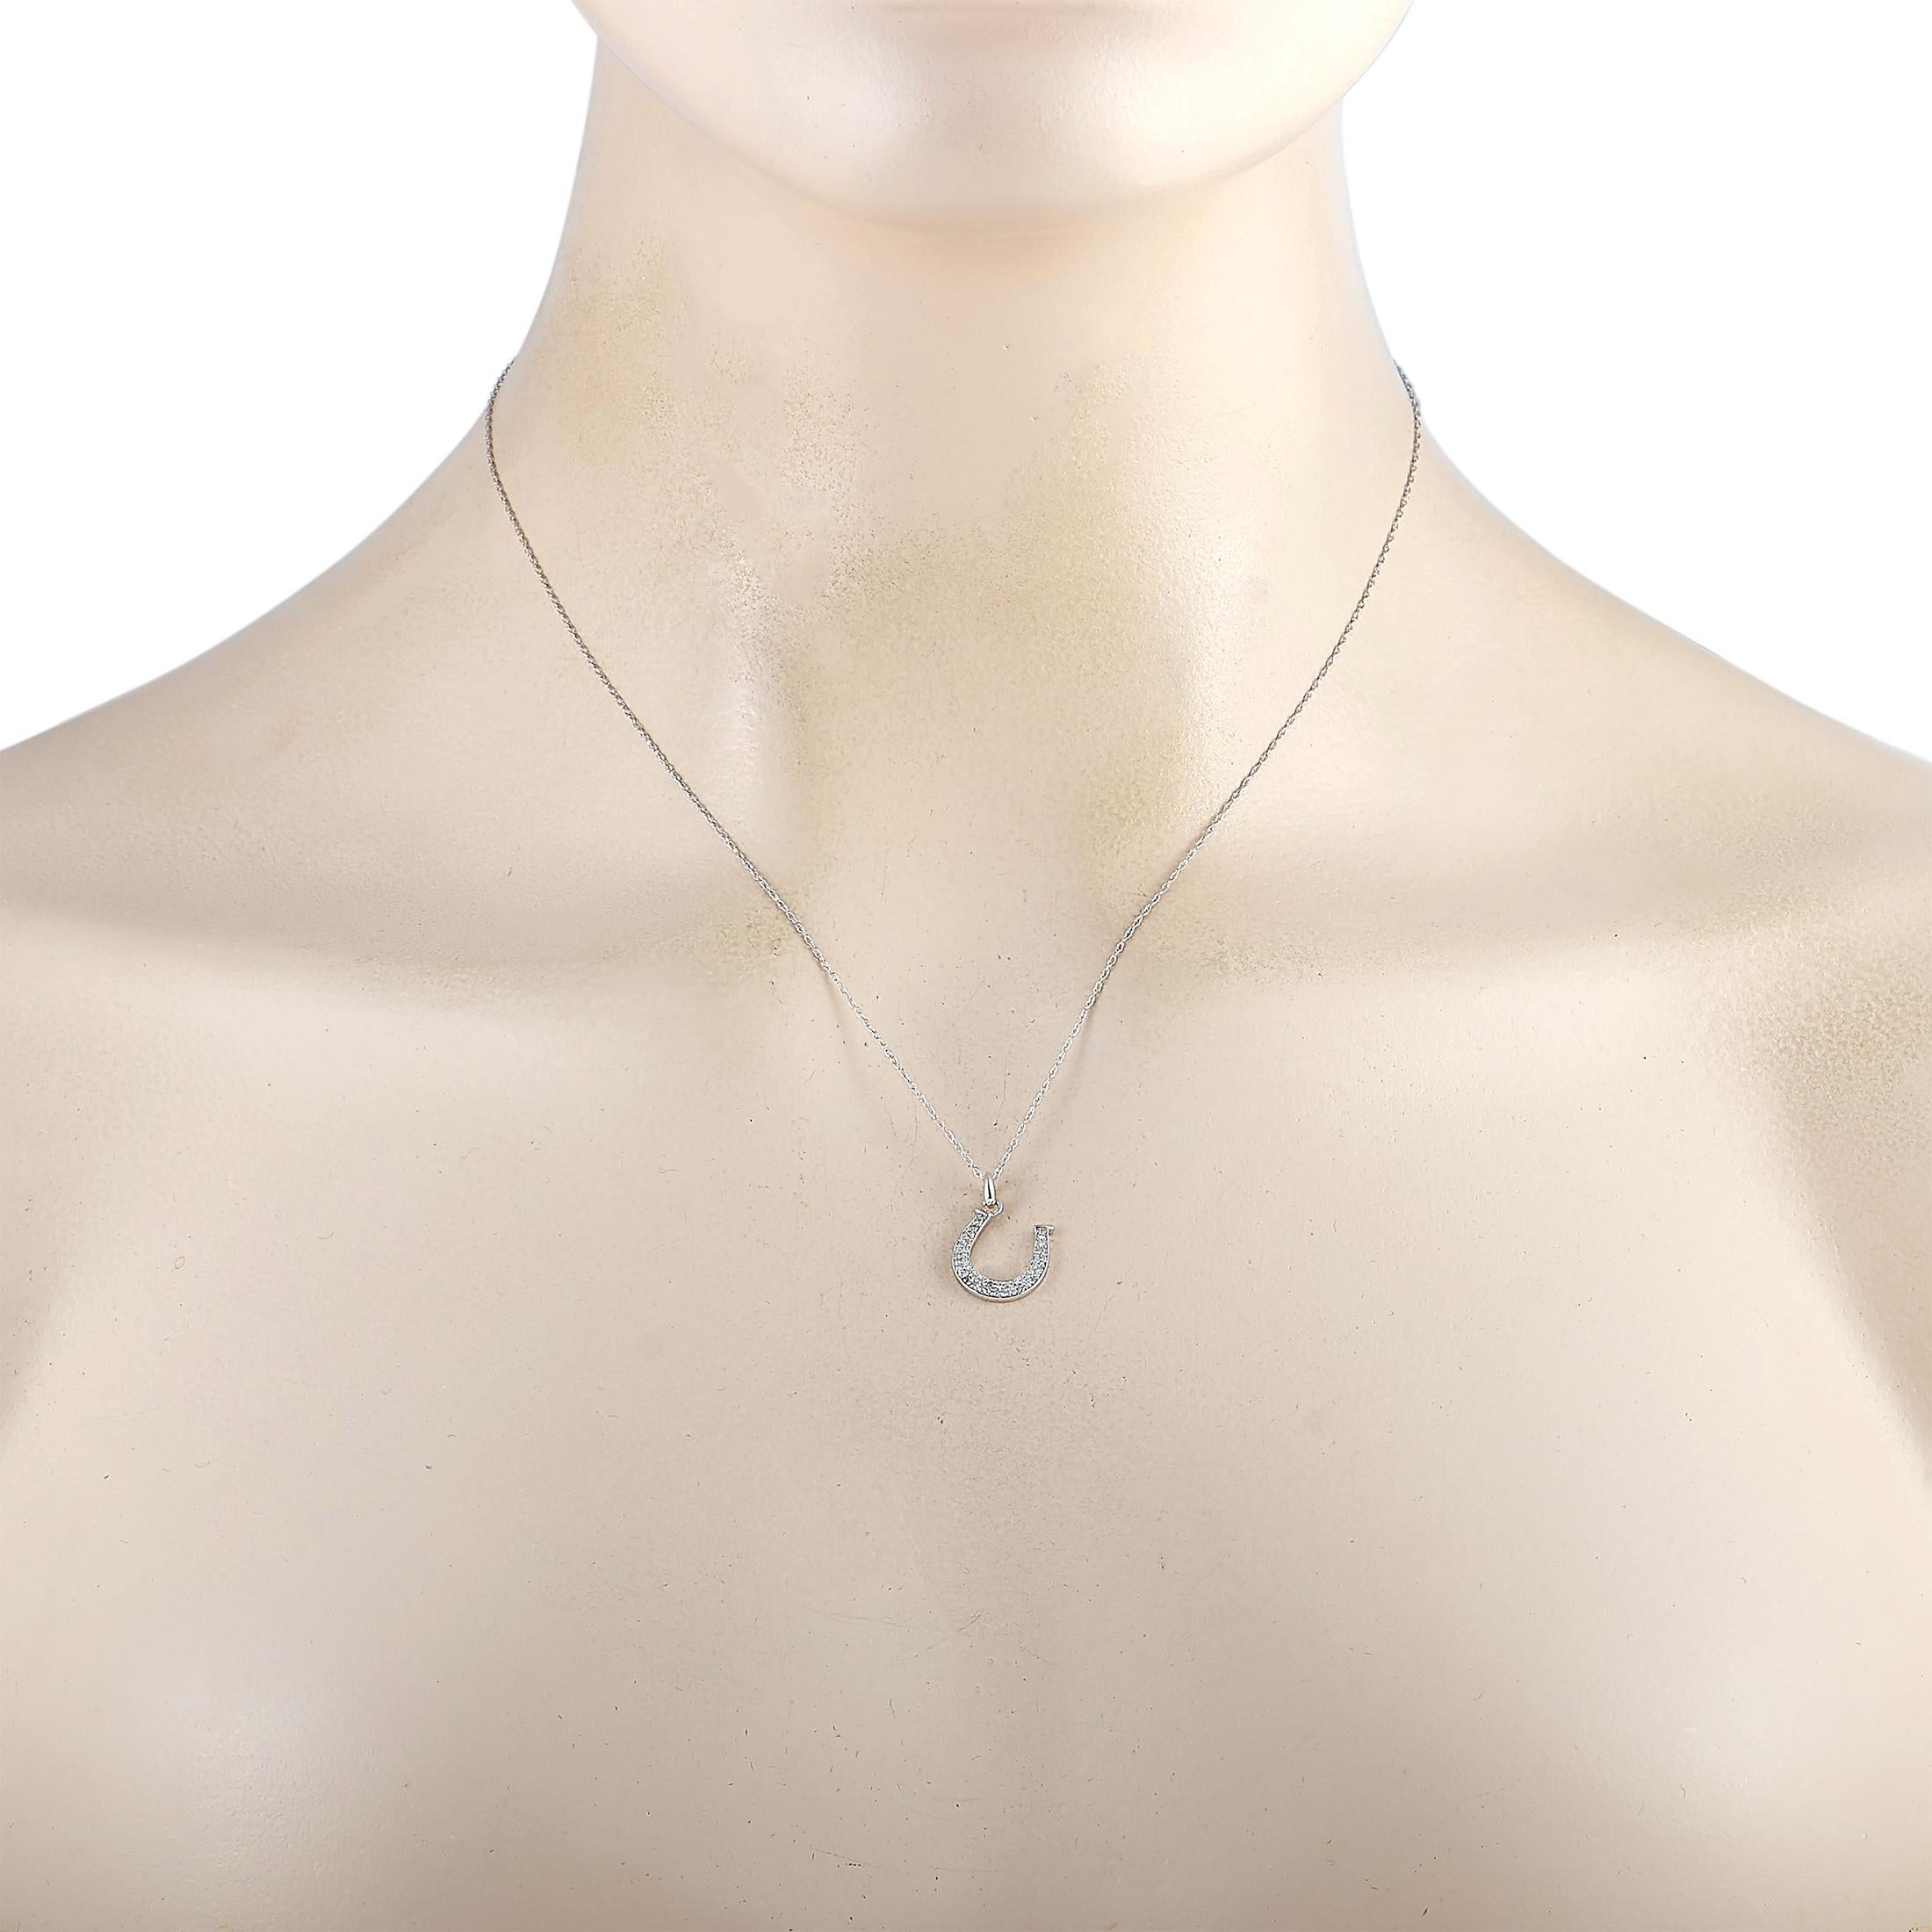 This LB Exclusive necklace is crafted from 14K white gold and weighs 1.5 grams. It is presented with a 17.50” chain and a horsebit pendant that measures 0.62” in length and 0.47” in width. The necklace is embellished with diamonds that total 0.14